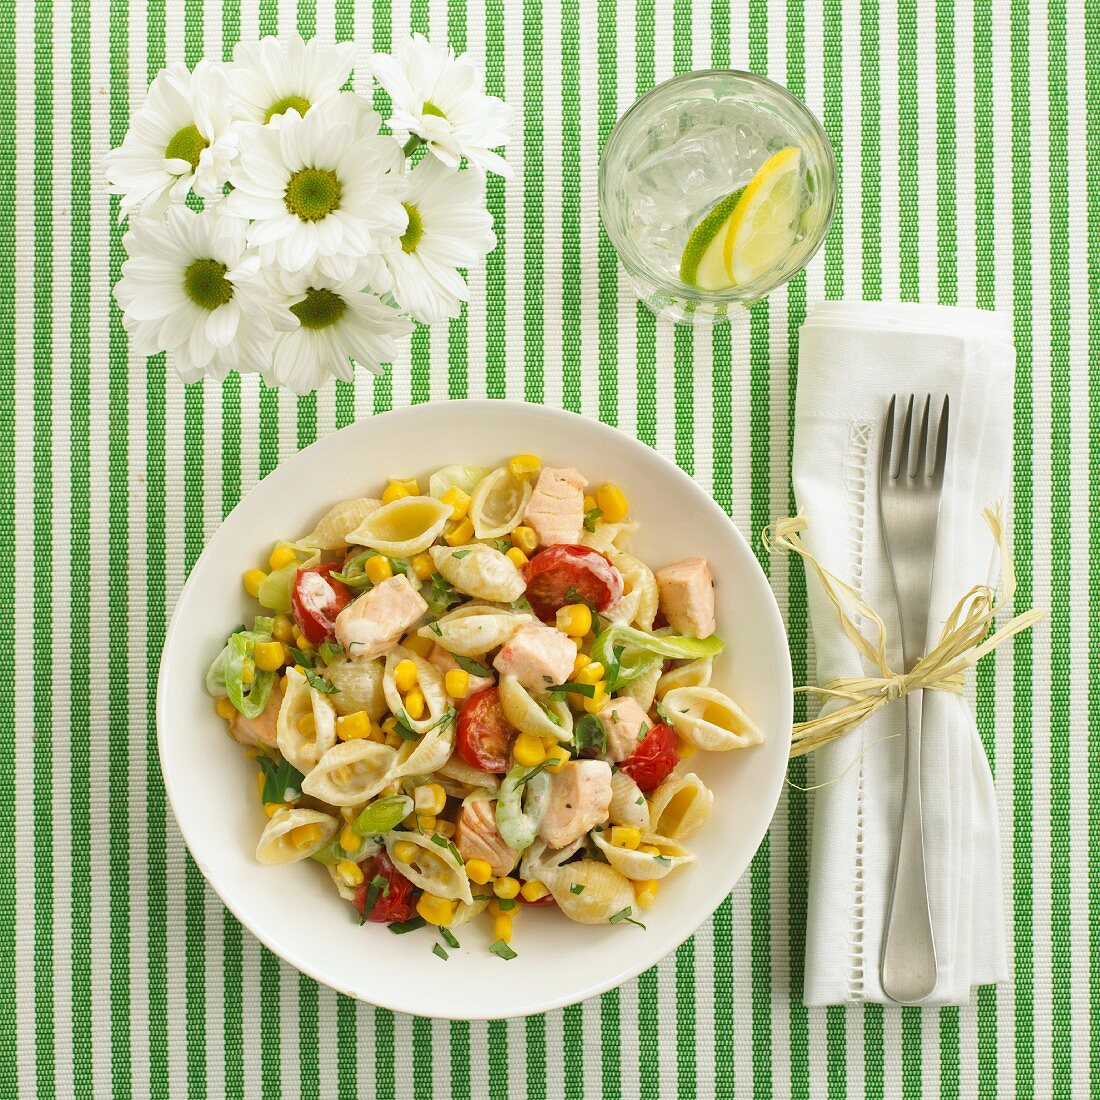 Pasta salad with pasta shells, salmon and vegetables (view from above)